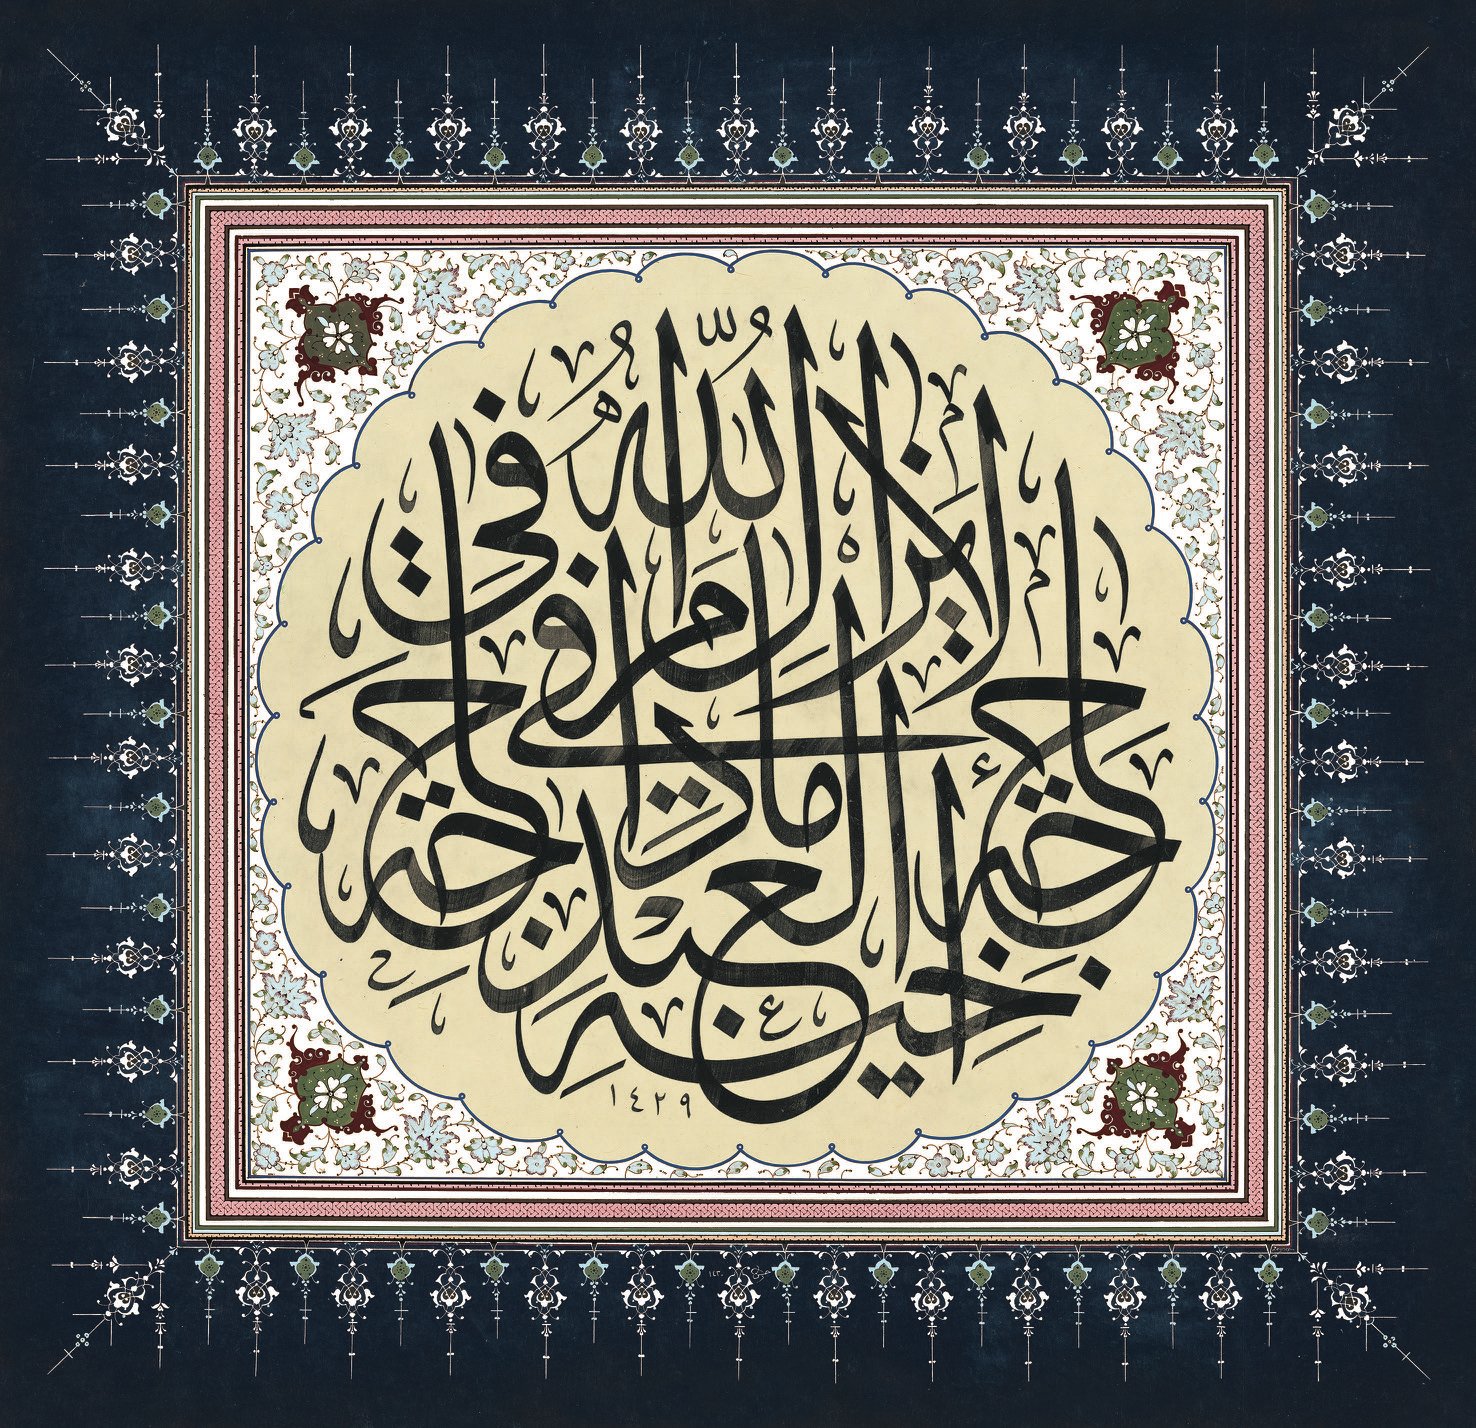 One of the works from the fifth International Albaraka Calligraphy Competition Exhibition.